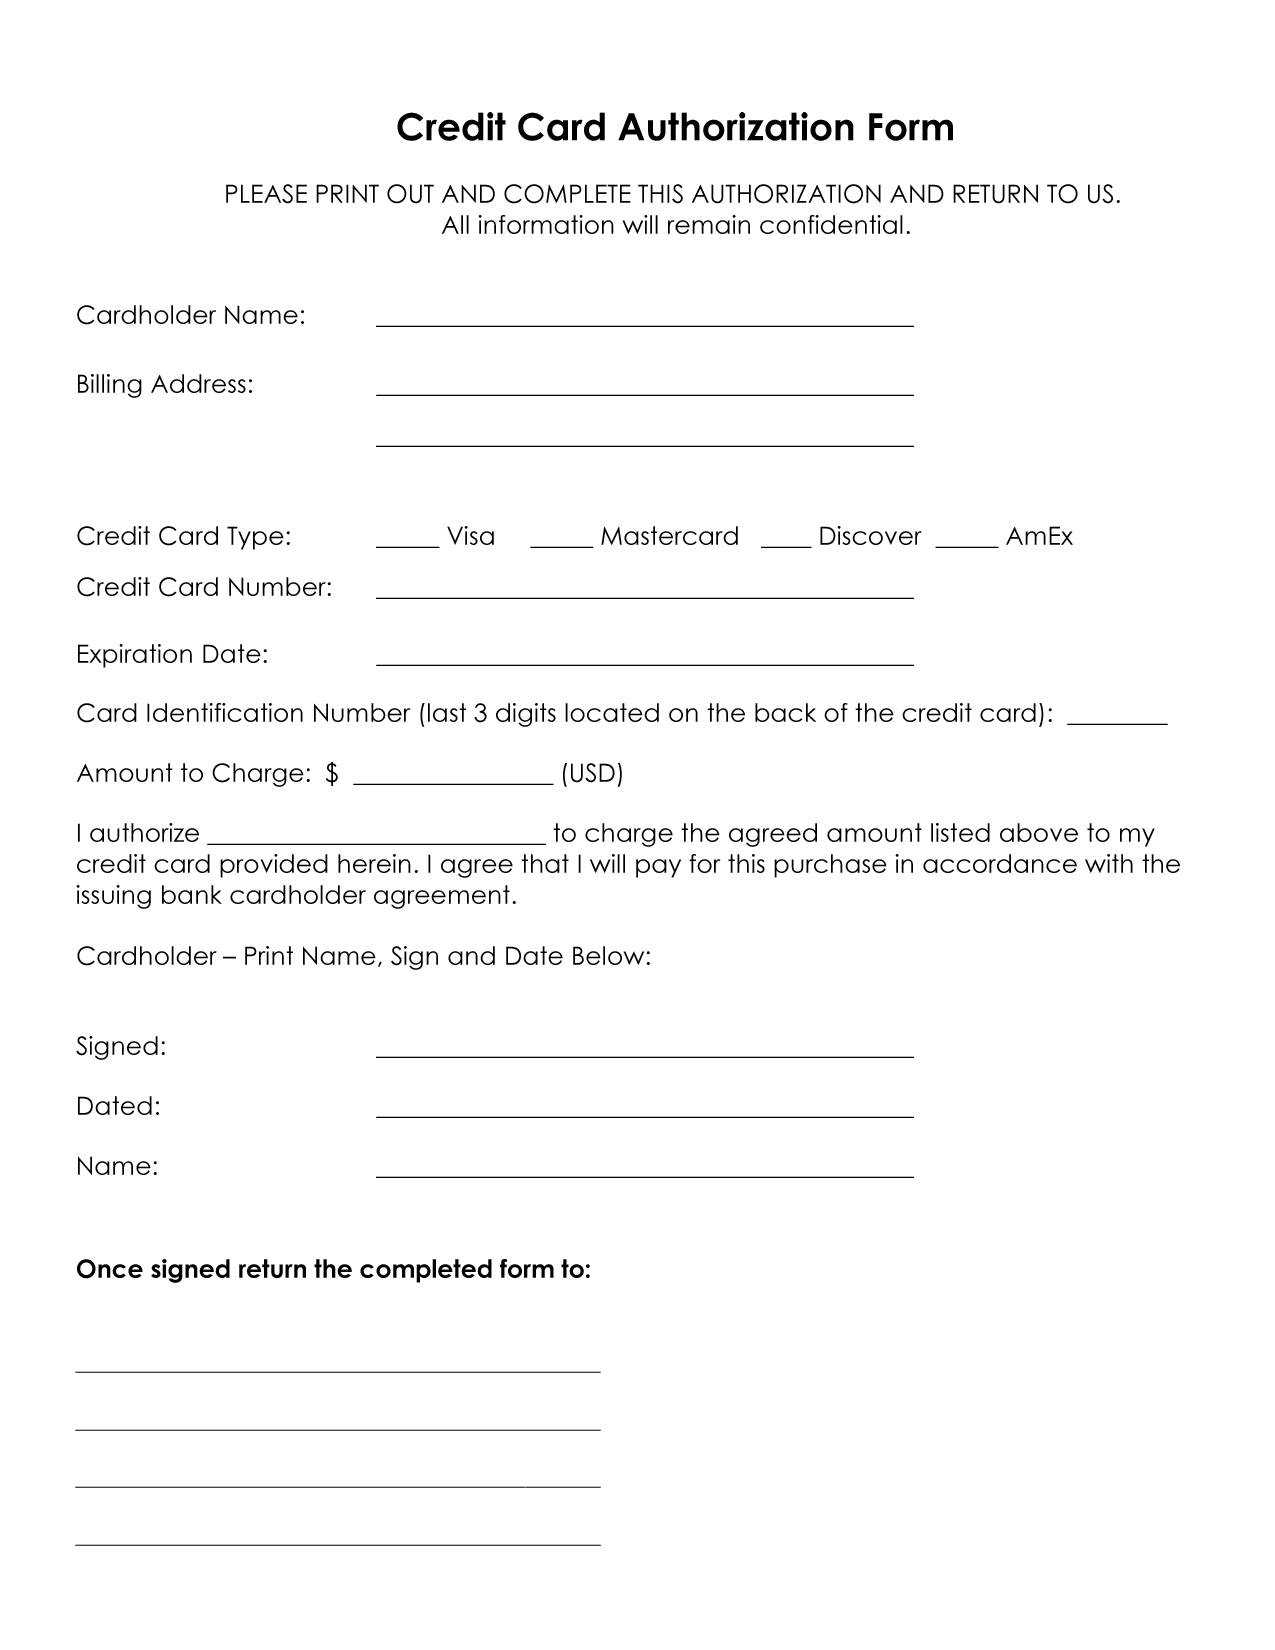 Free Credit Card Authorization Form Template - Calep With Regard To Credit Card On File Form Templates